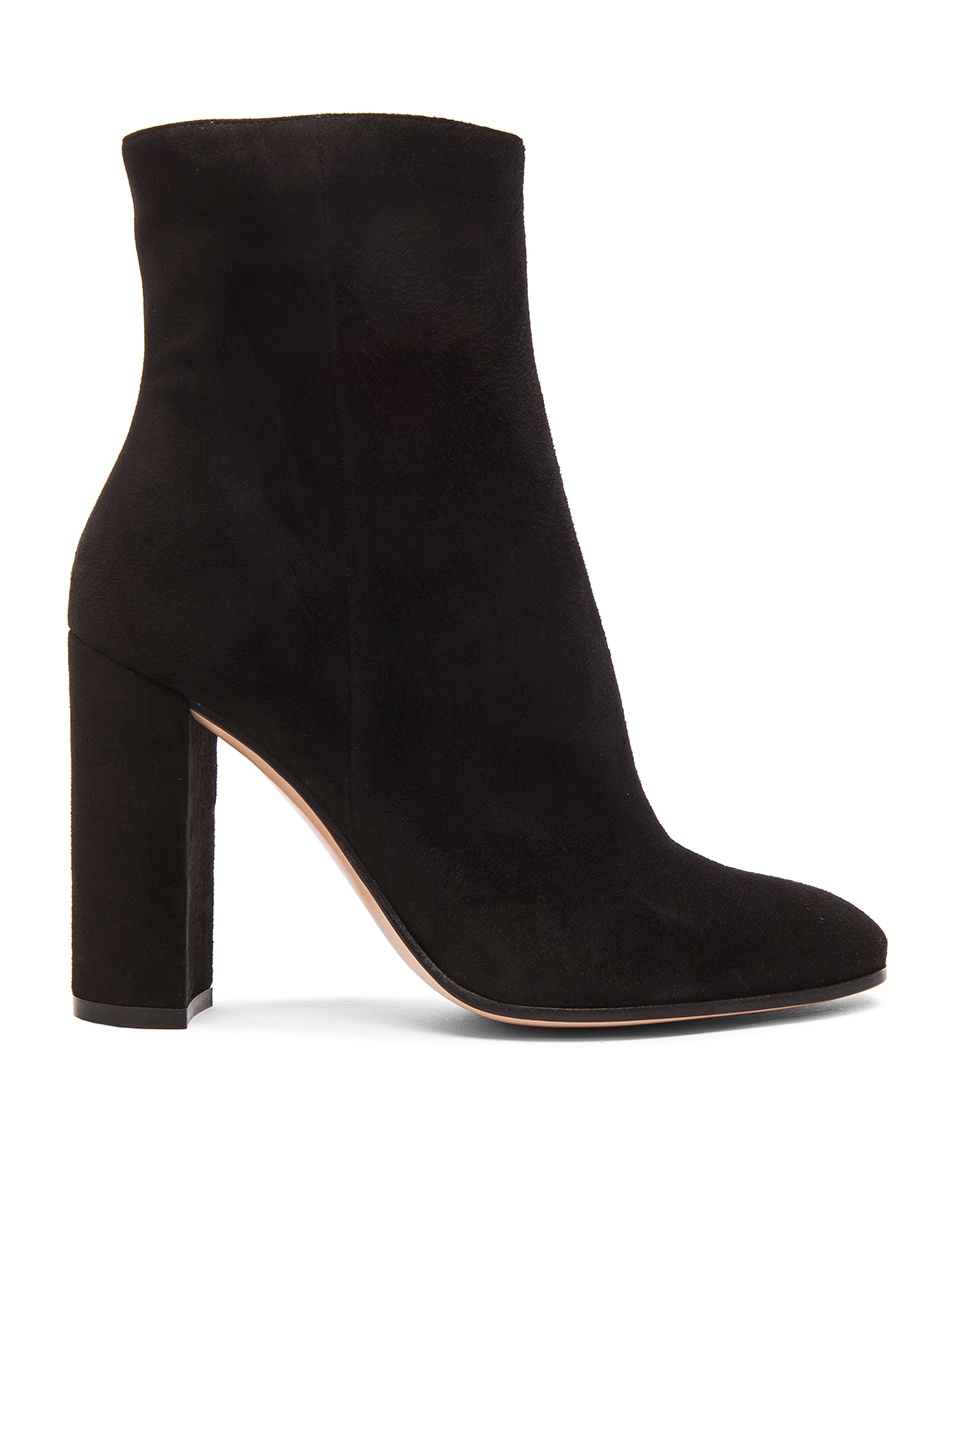 Image 1 of Gianvito Rossi Suede Booties in Black